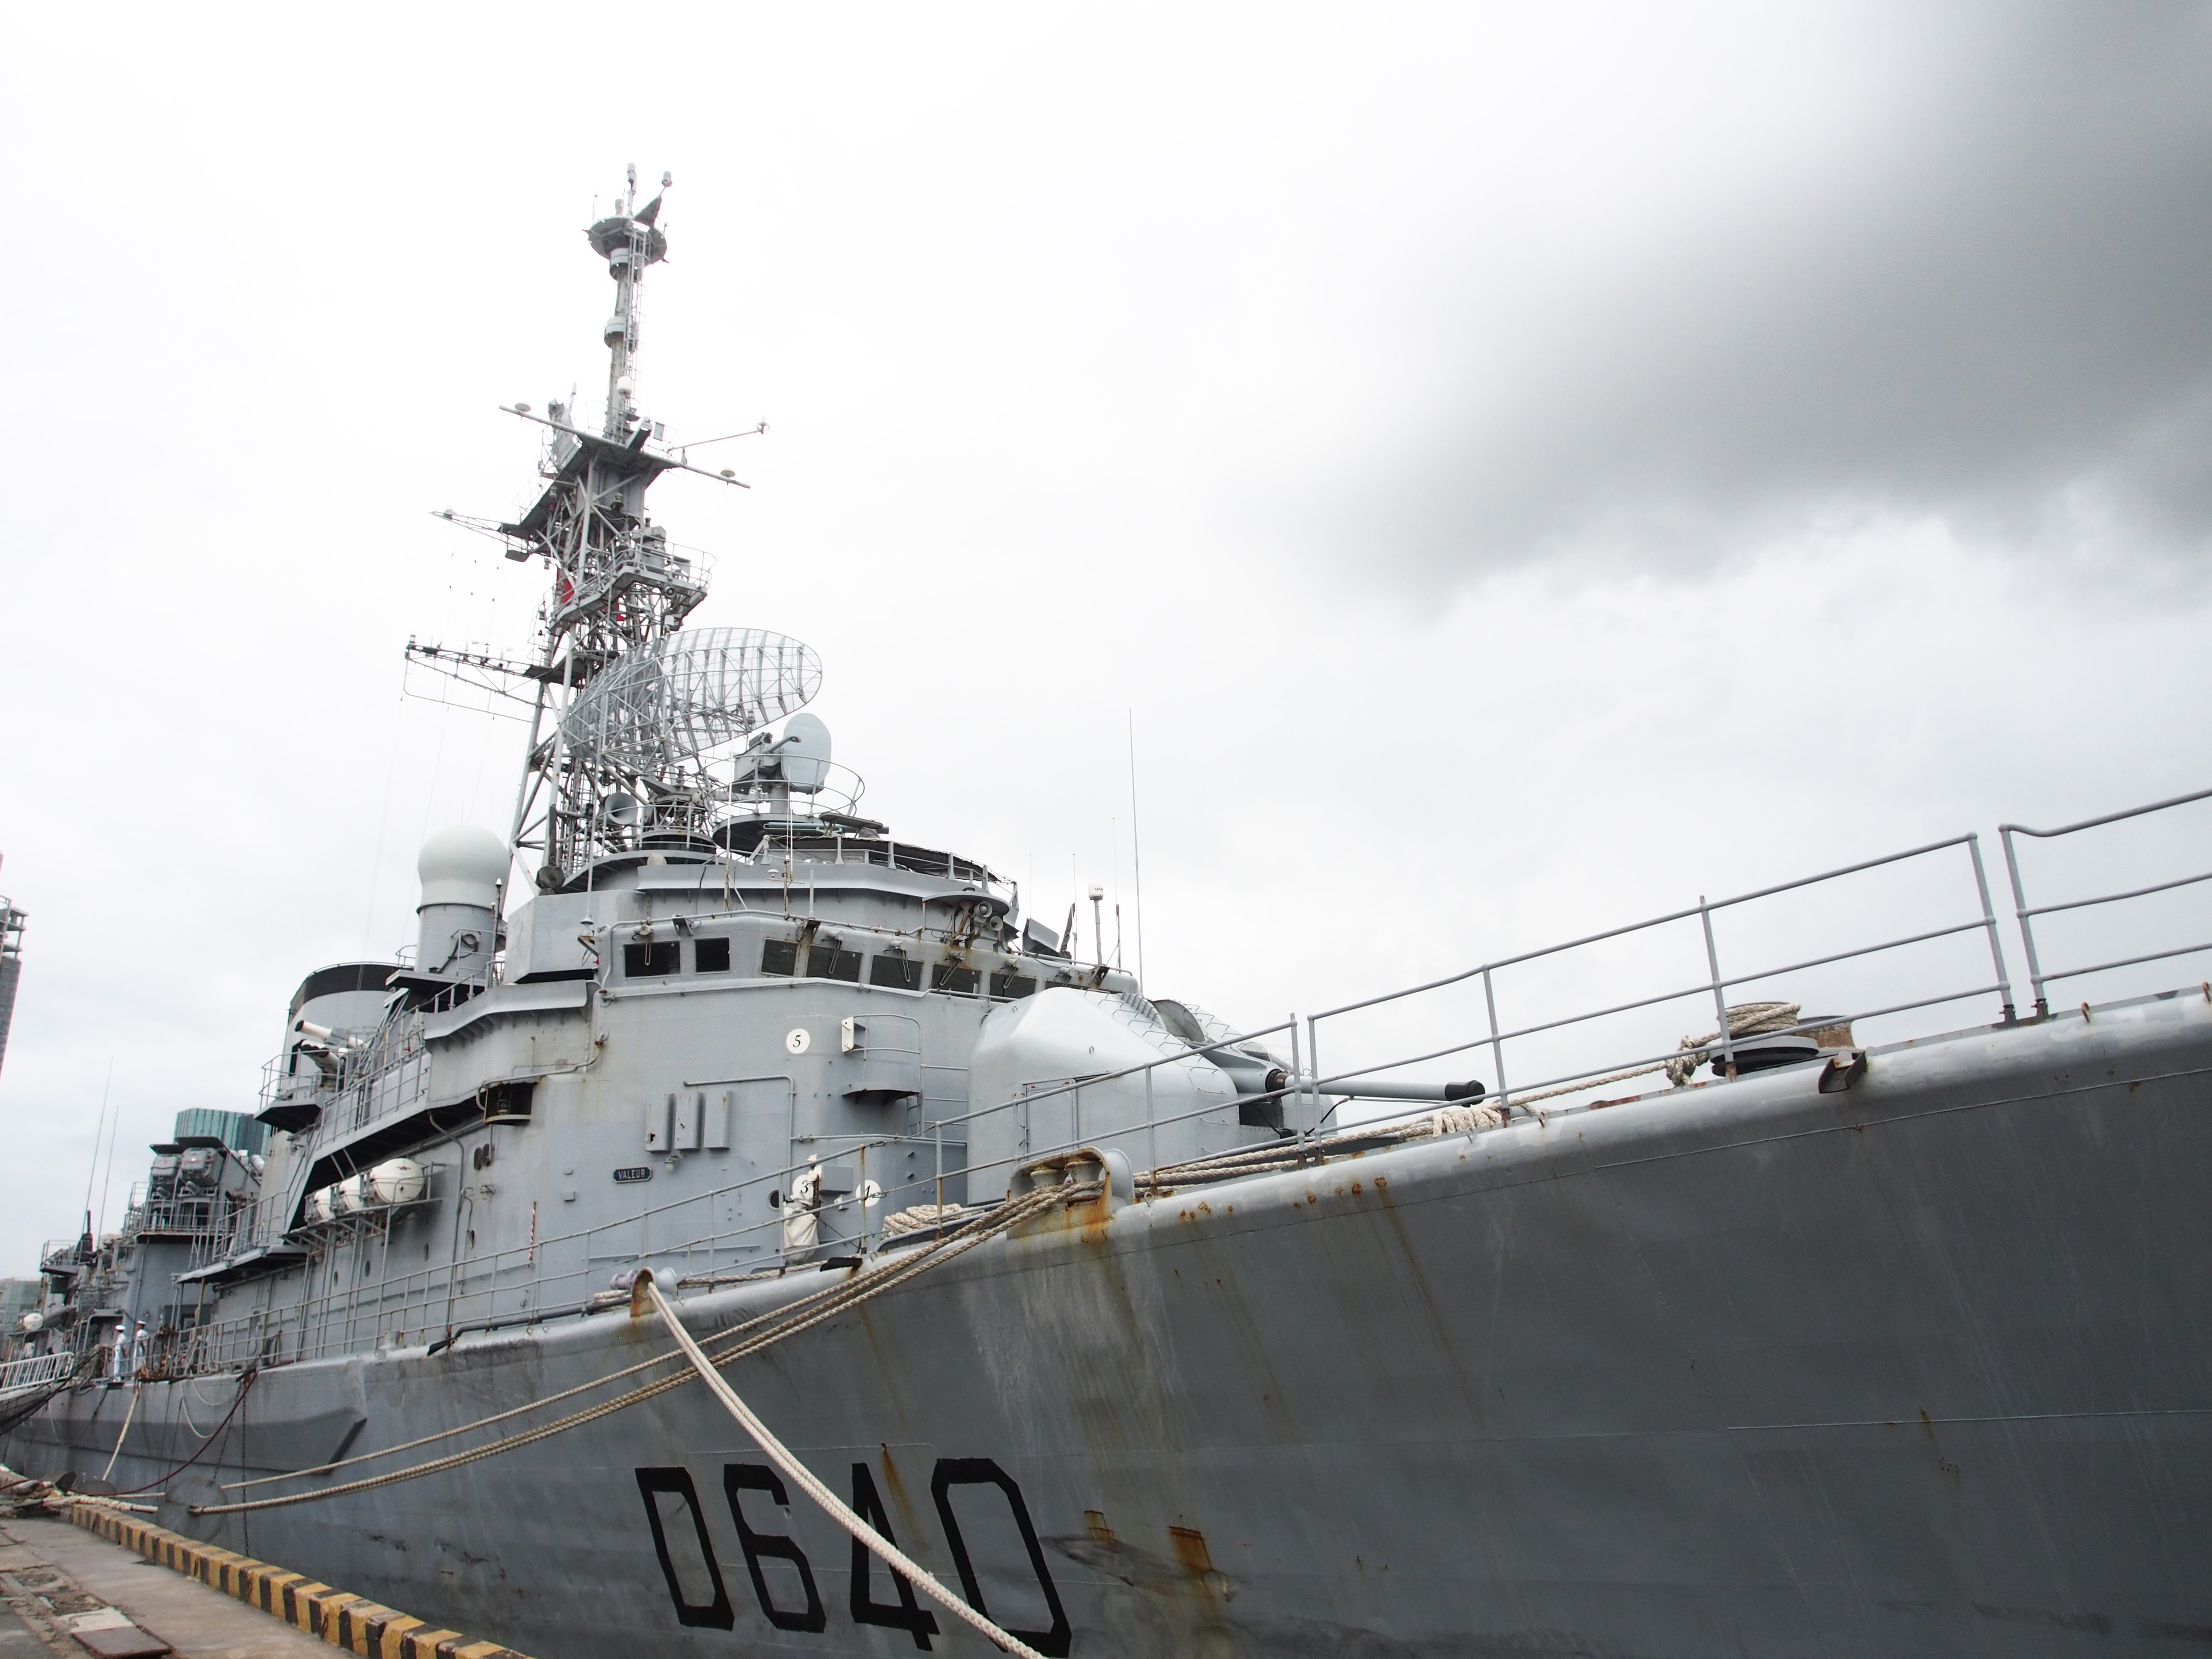 French frigate Georges Leygues docks in HCMC